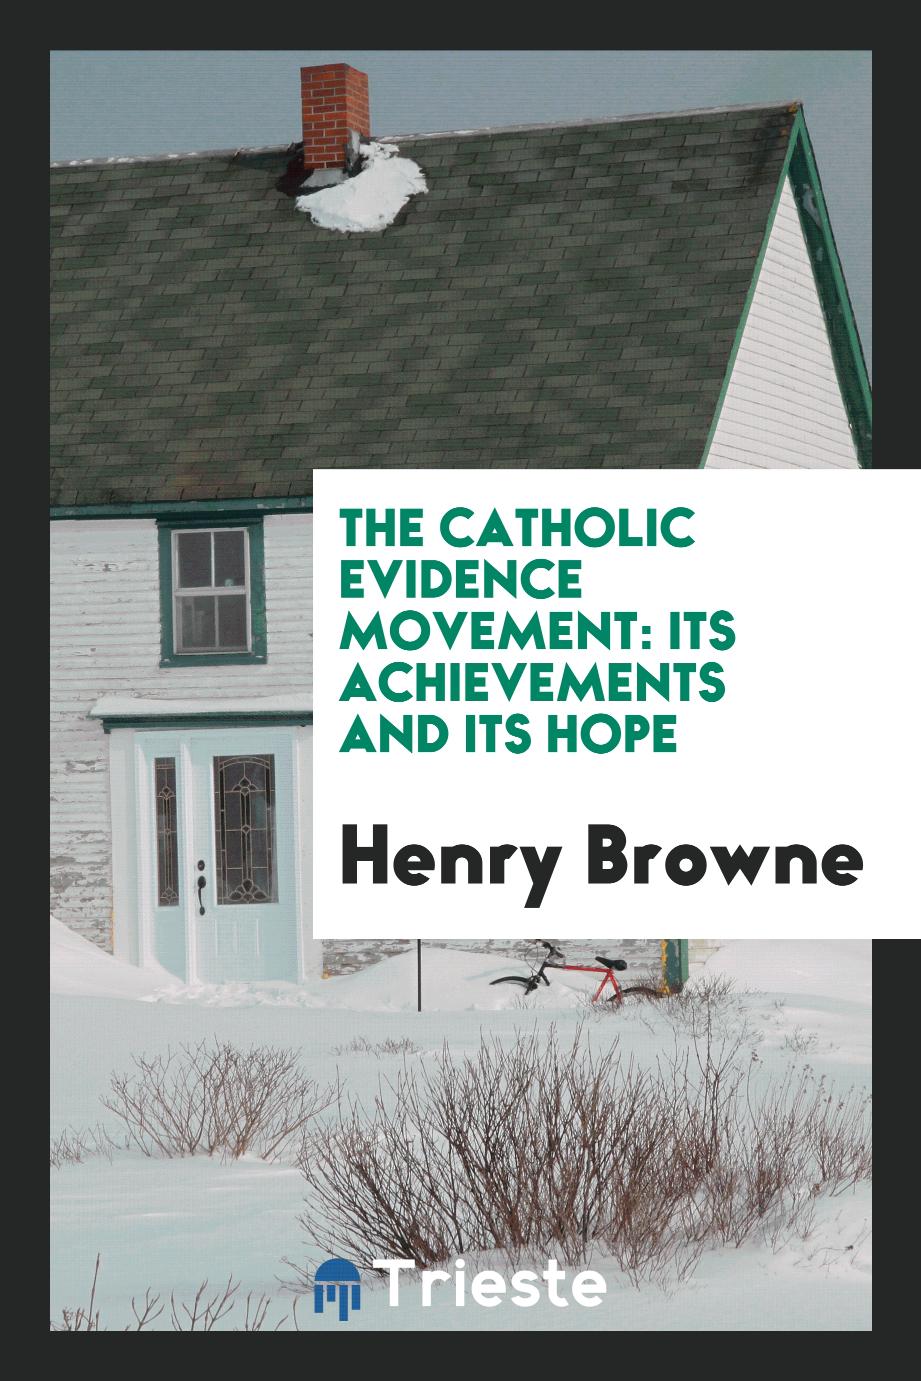 The Catholic evidence movement: its achievements and its hope